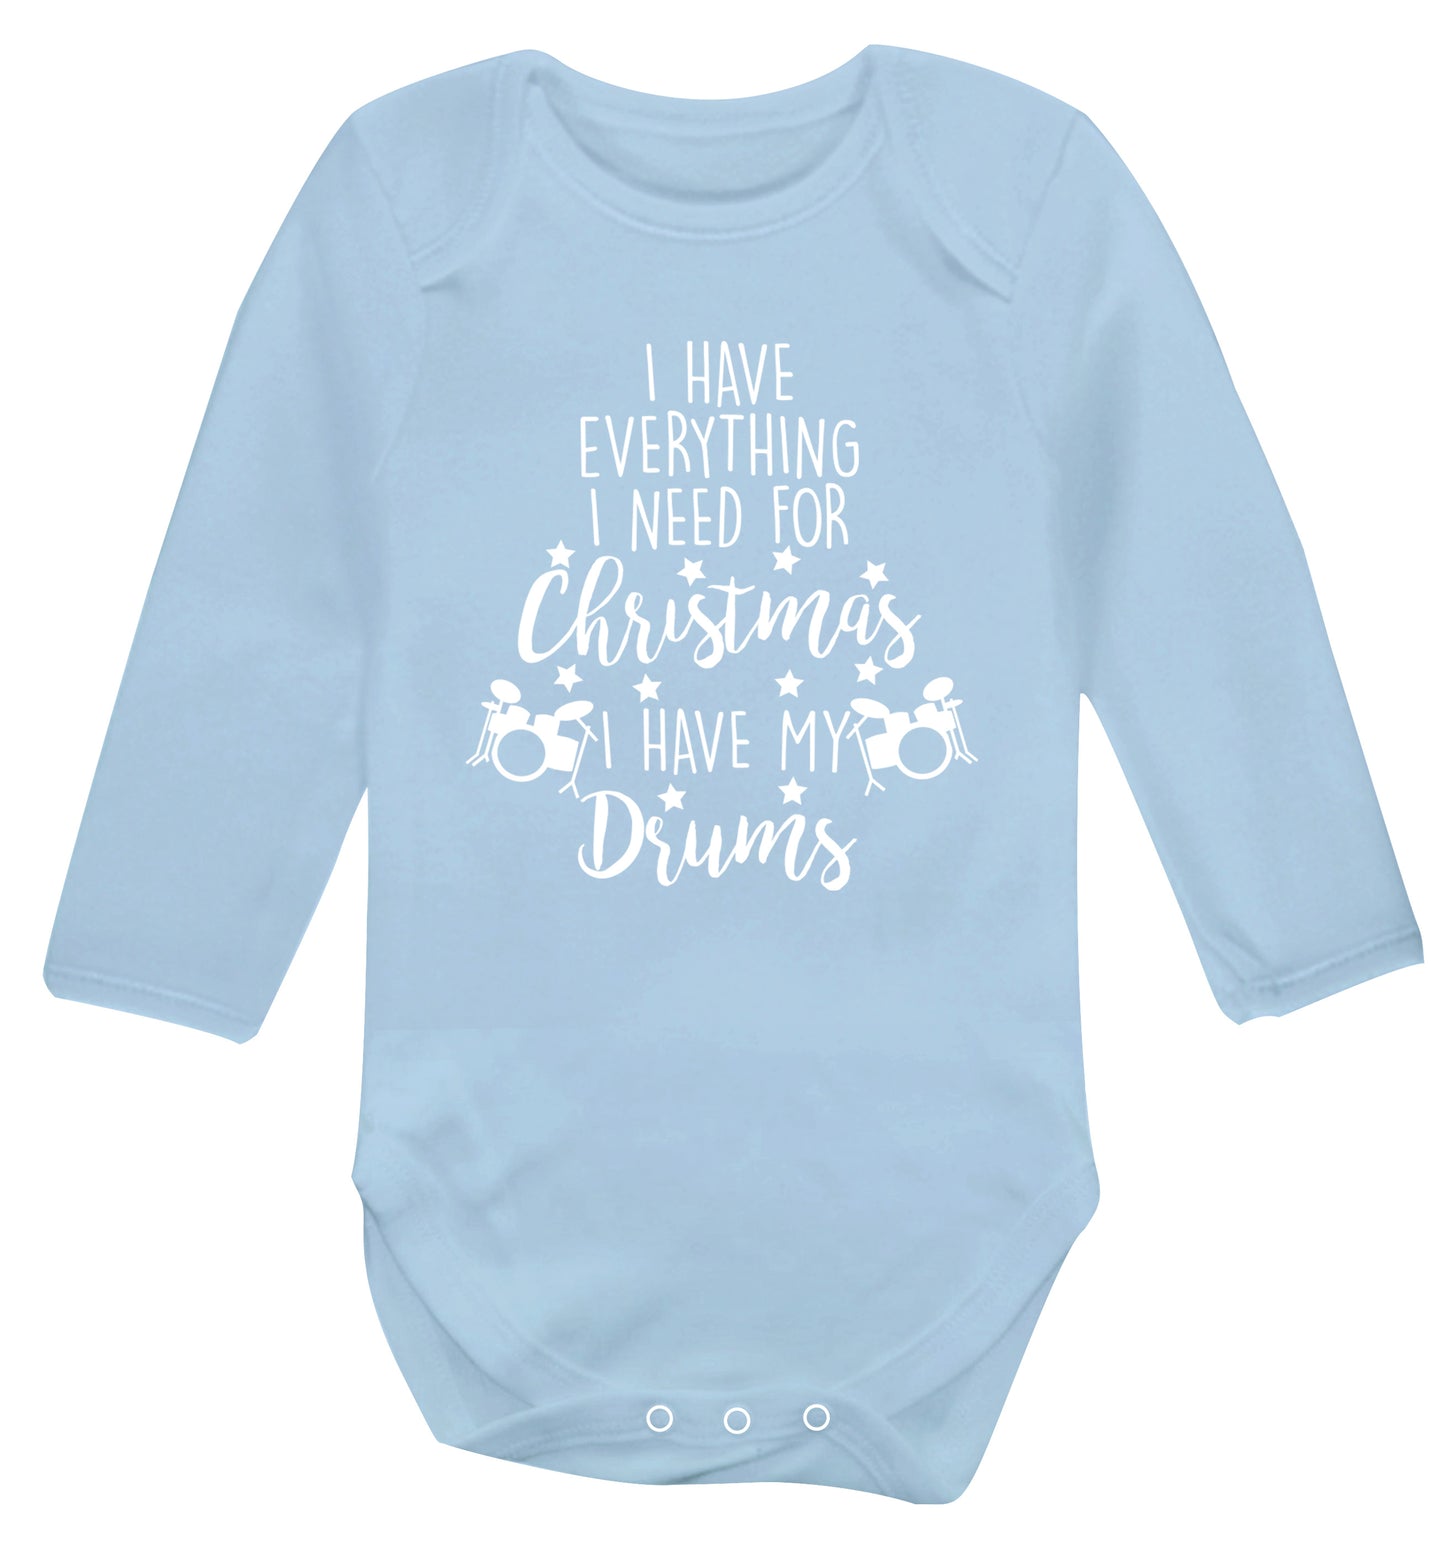 I have everything I need for Christmas I have my drums! Baby Vest long sleeved pale blue 6-12 months